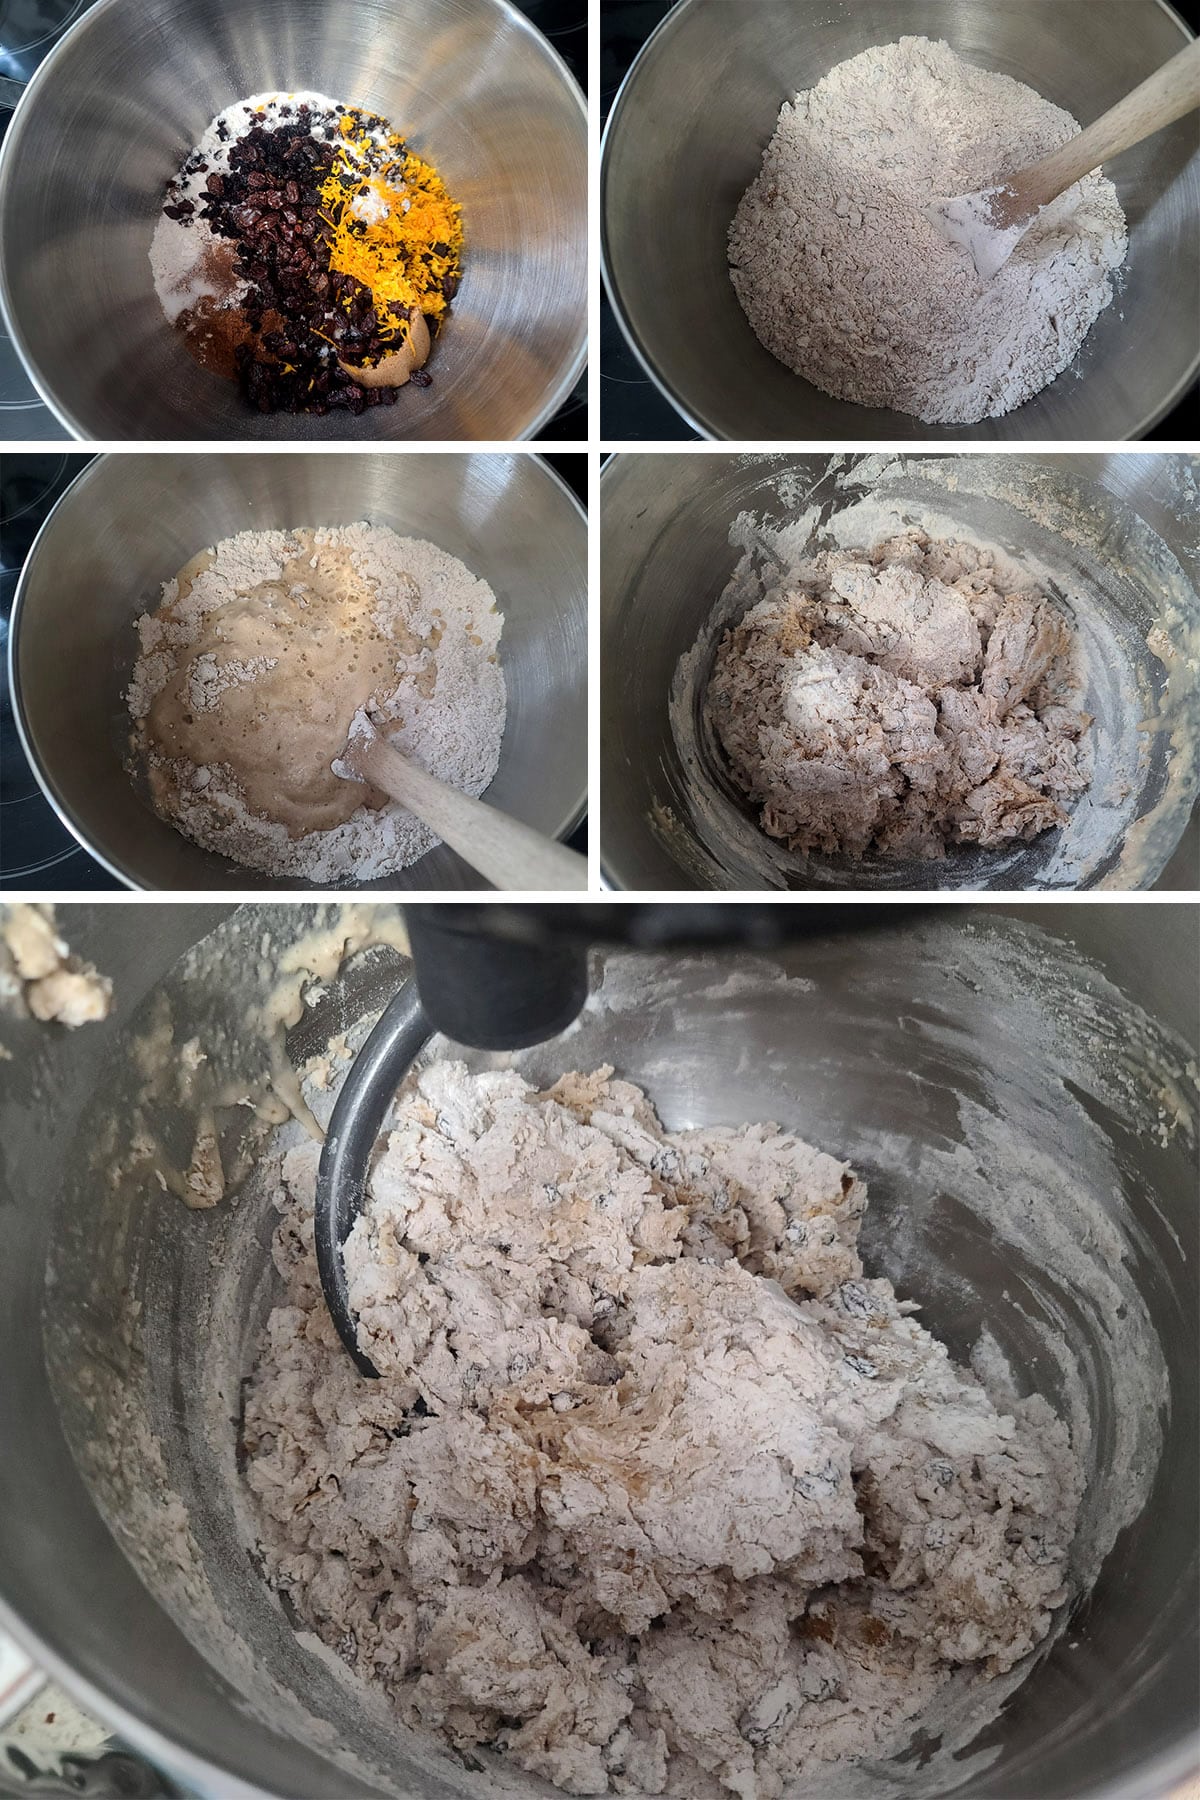 A 5 part image showing the dough ingredients being mixed into a loose dough.